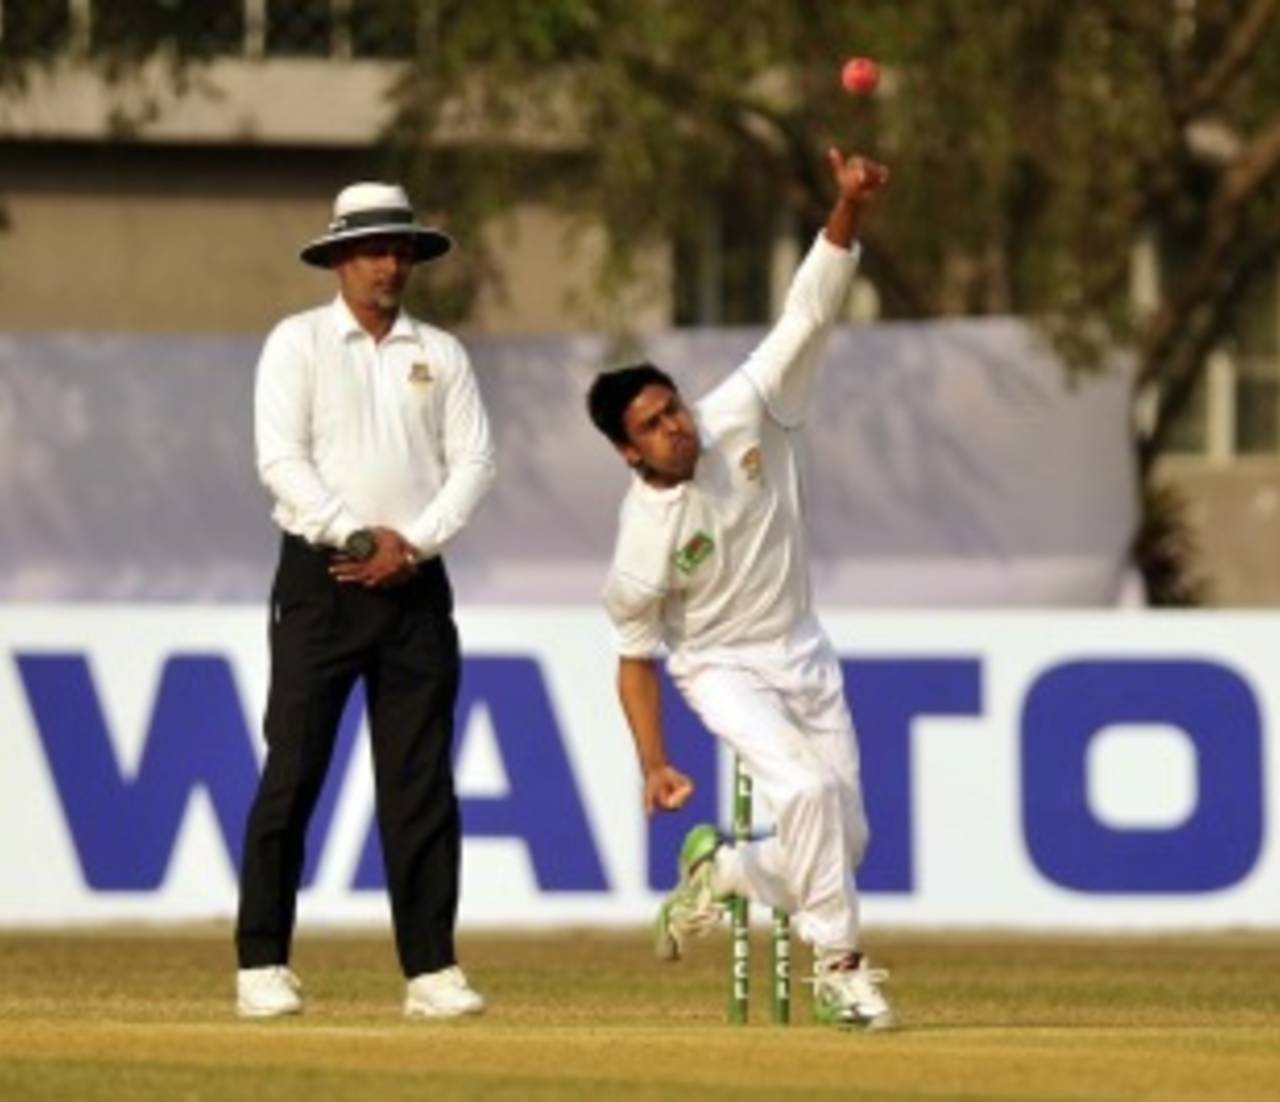 Taijul Islam took seven of the eight wickets on the first day, East Zone v North Zone, Bangladesh Cricket League, 1st day, Savar, January 18, 2014